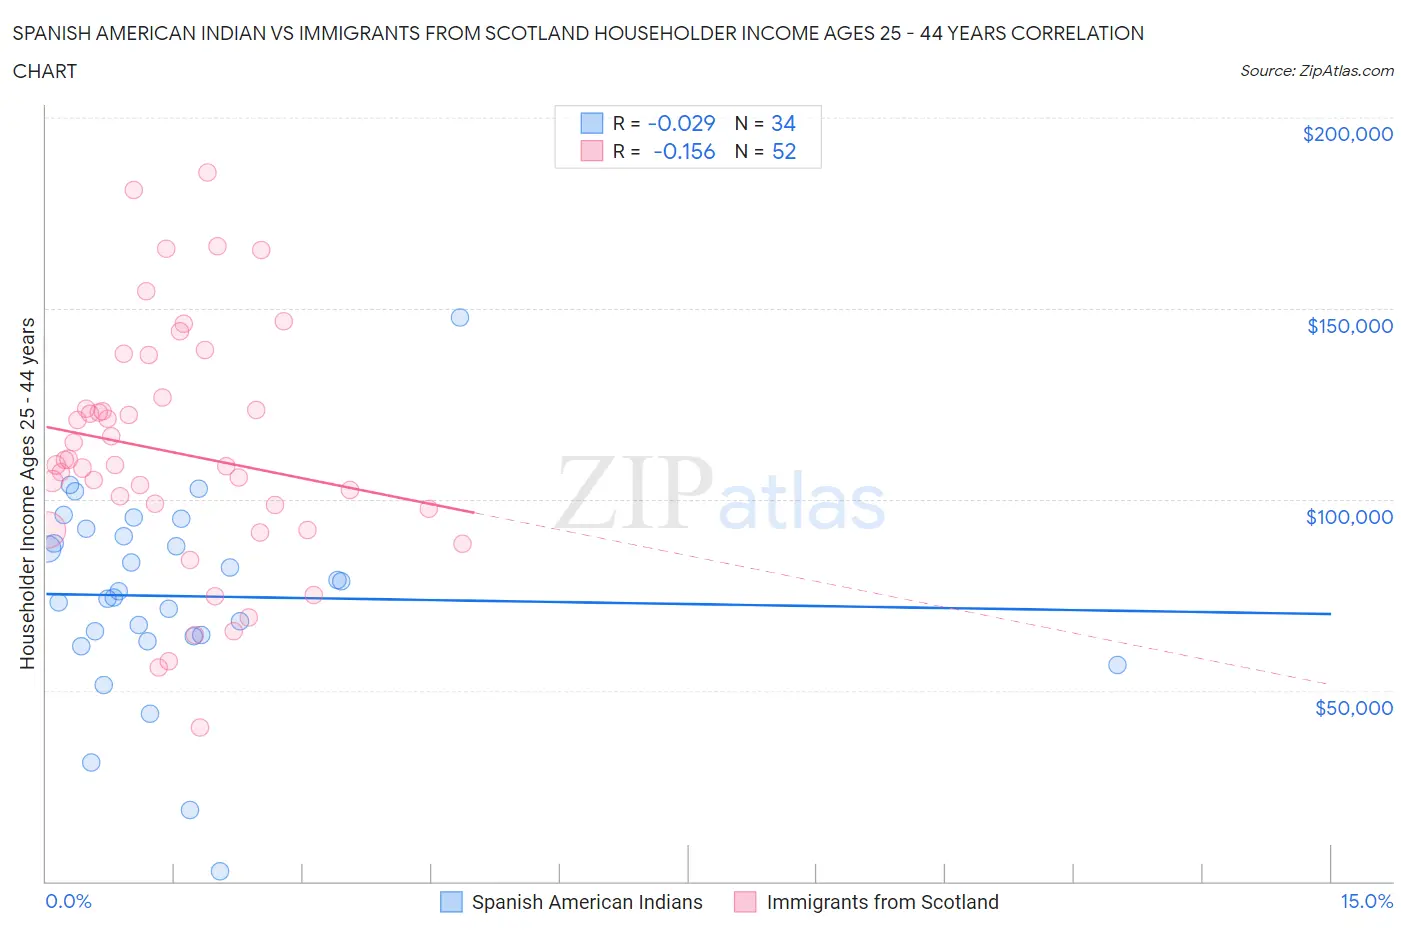 Spanish American Indian vs Immigrants from Scotland Householder Income Ages 25 - 44 years